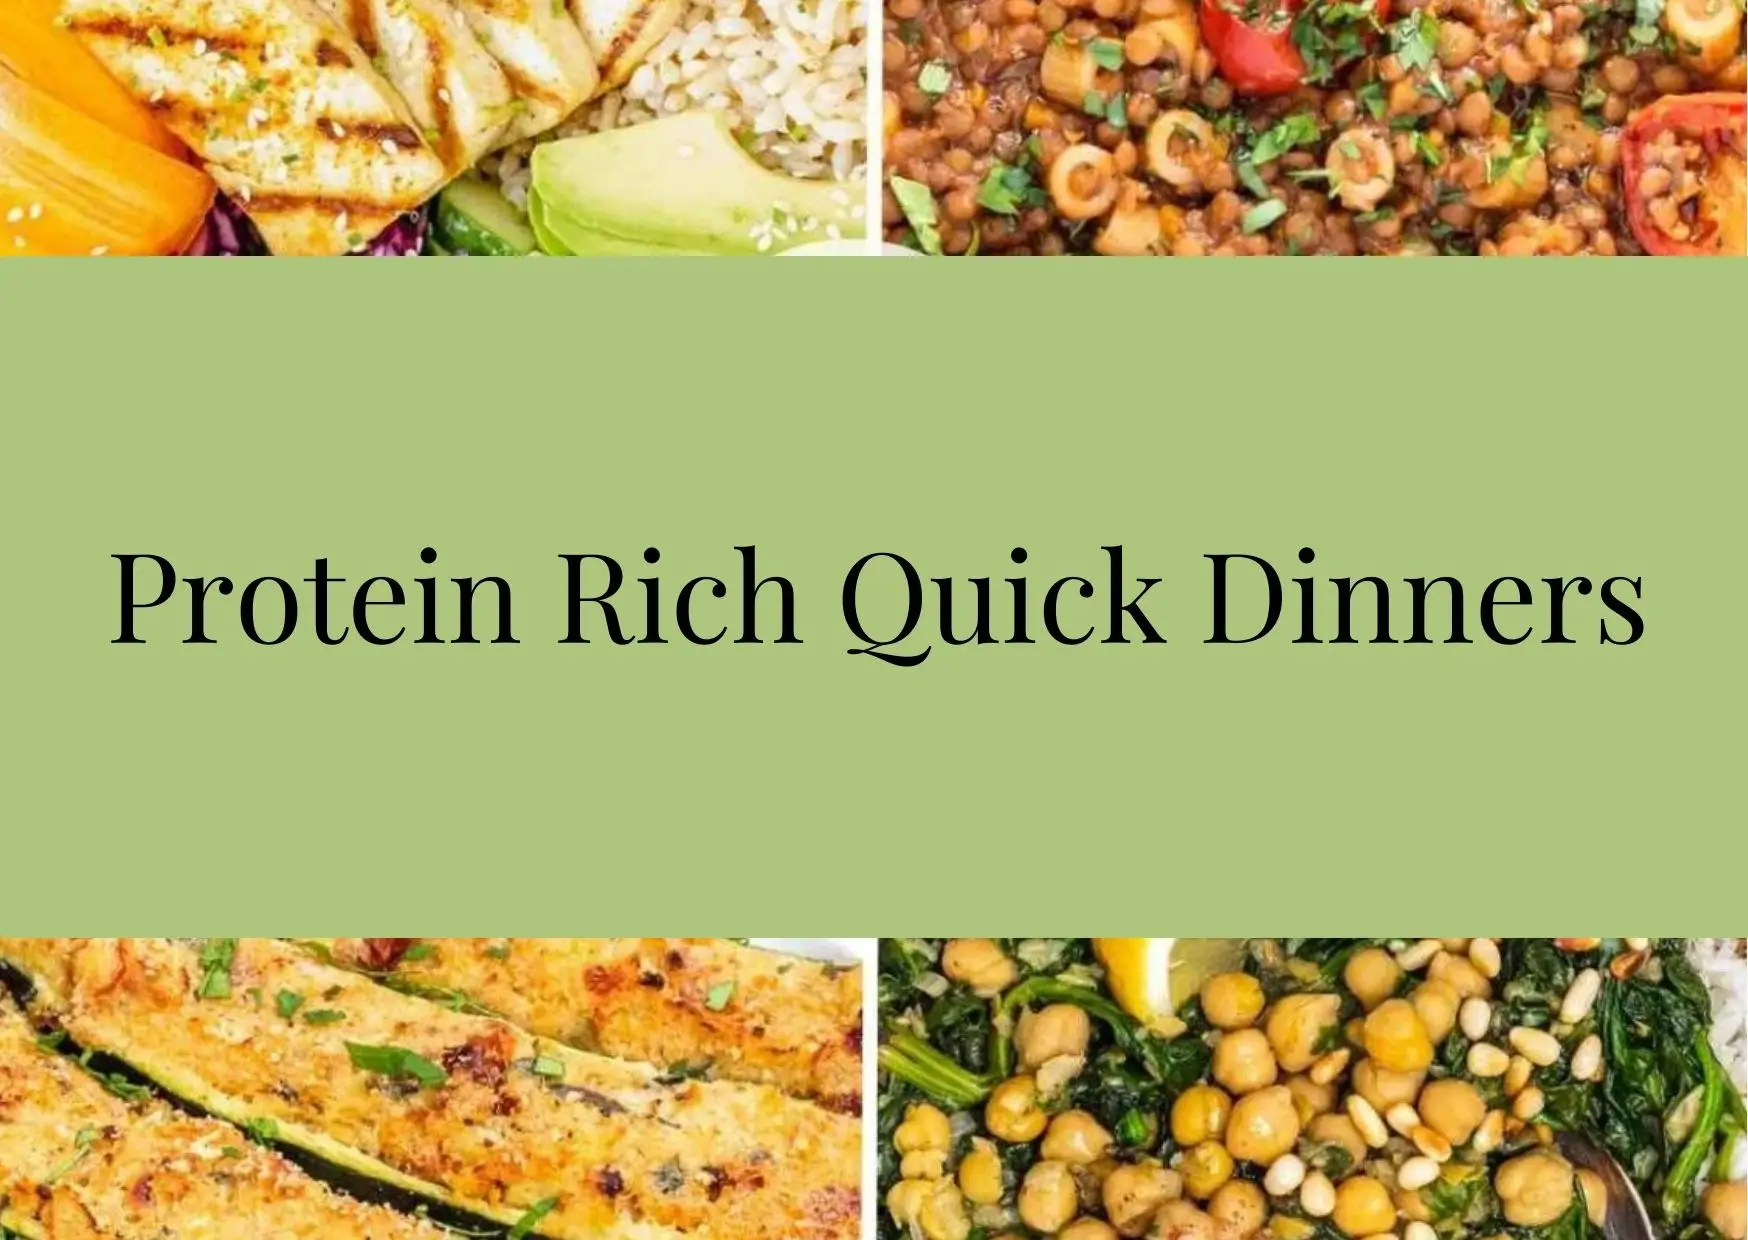 Protein Rich Quick Dinners : Fueling Your Body with Nutritious Meals